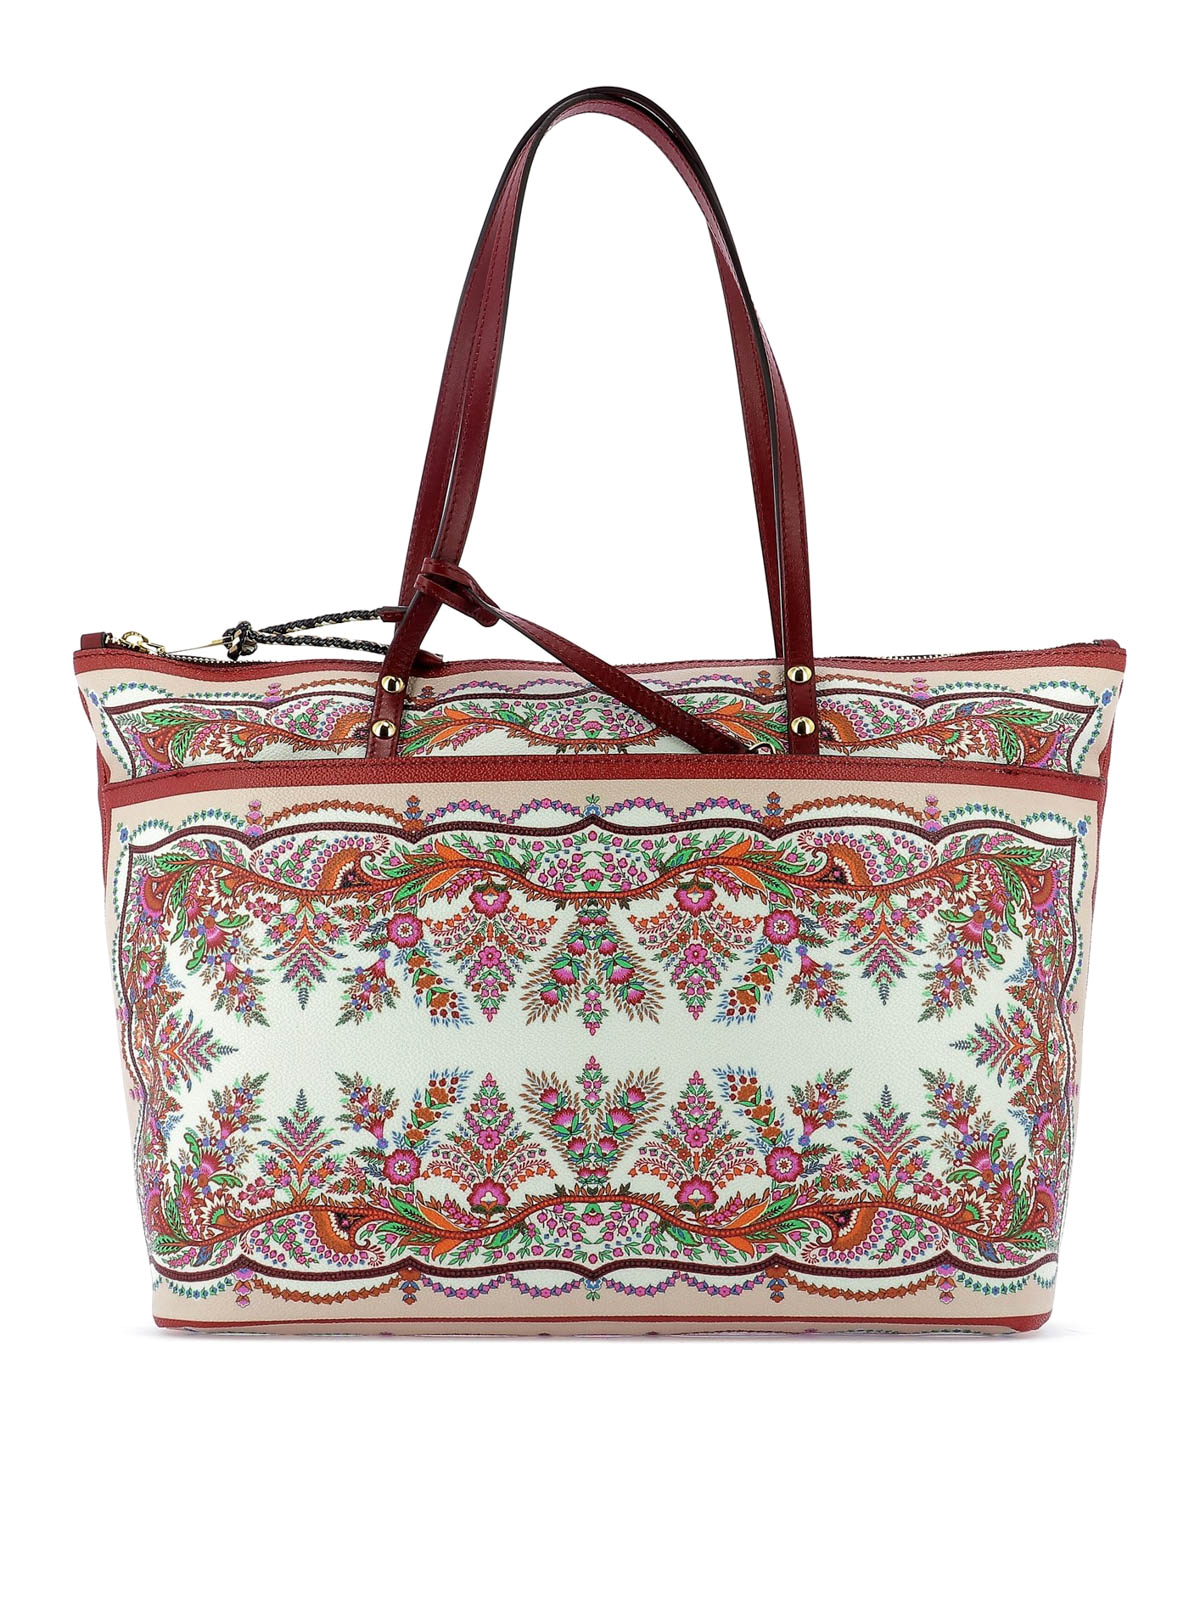 Etro - Flower print leather tote bag - totes bags - 1H97729550300